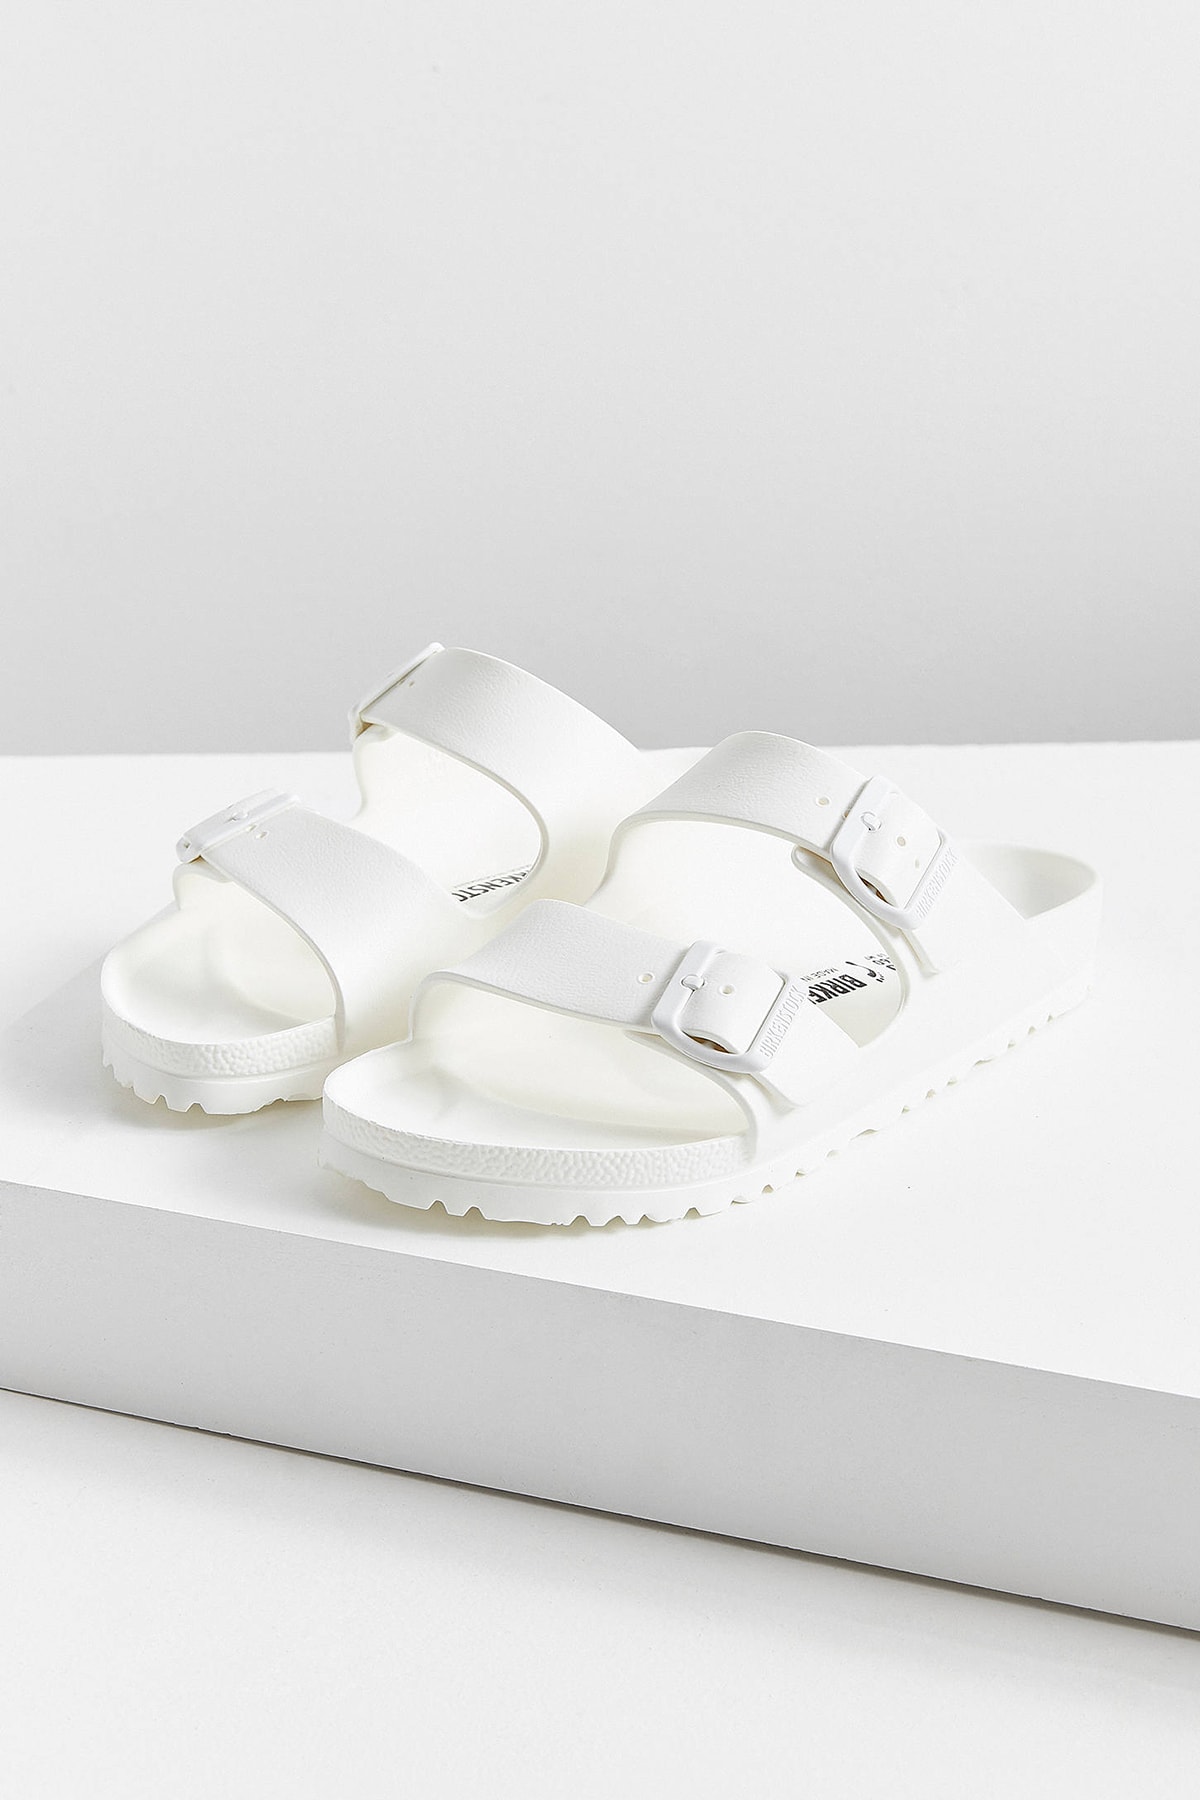 Birkenstock Arizona EVA Sandals White Urban Outfitters Price Release Slip Ons Slippers Where to Buy